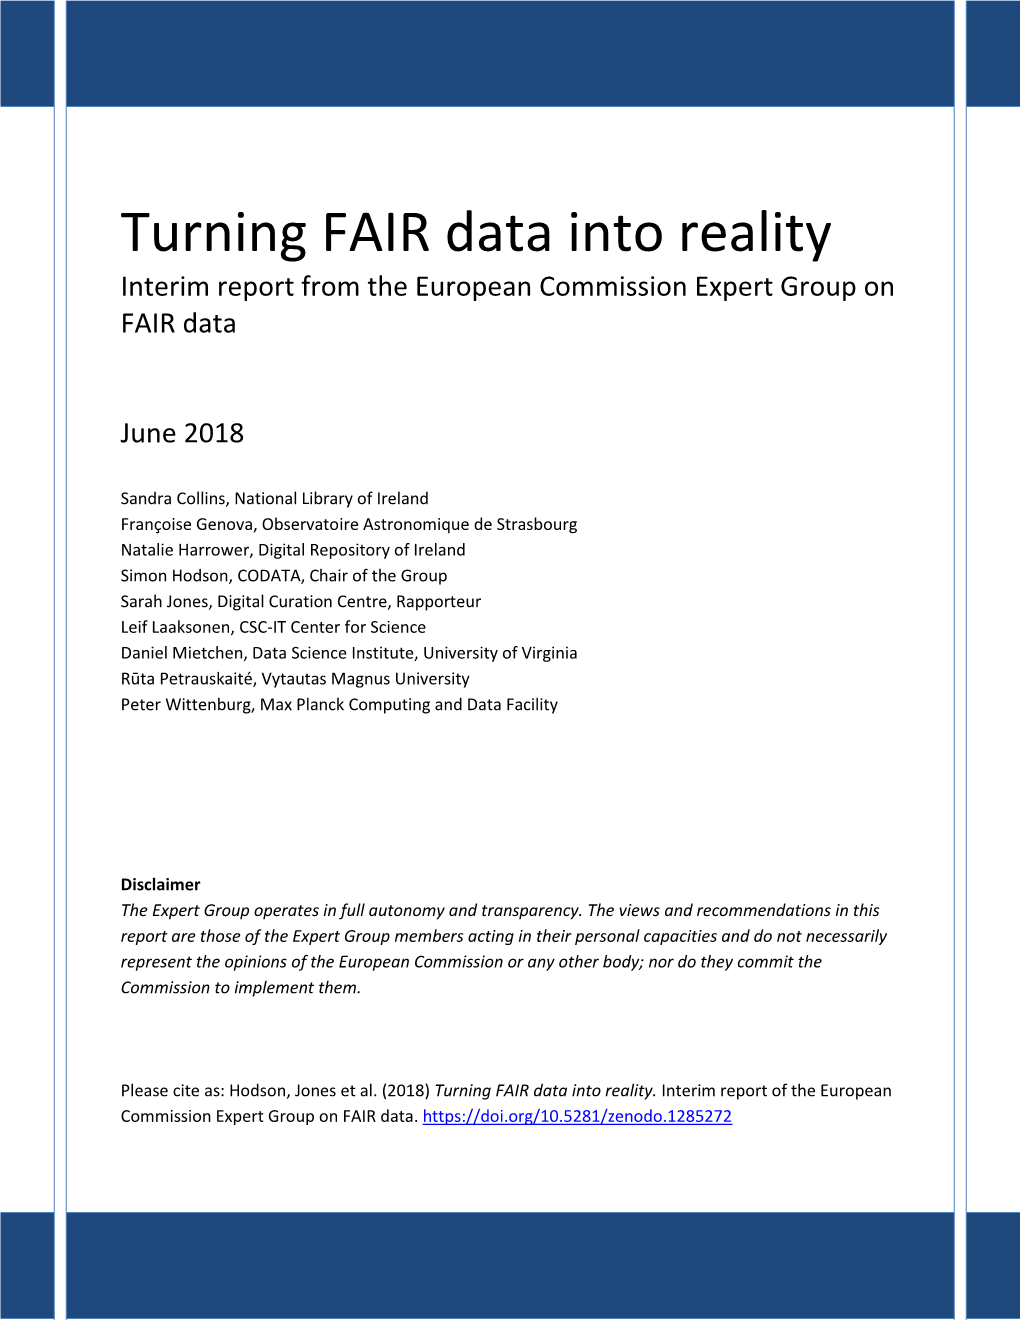 Turning FAIR Data Into Reality Interim Report from the European Commission Expert Group on FAIR Data